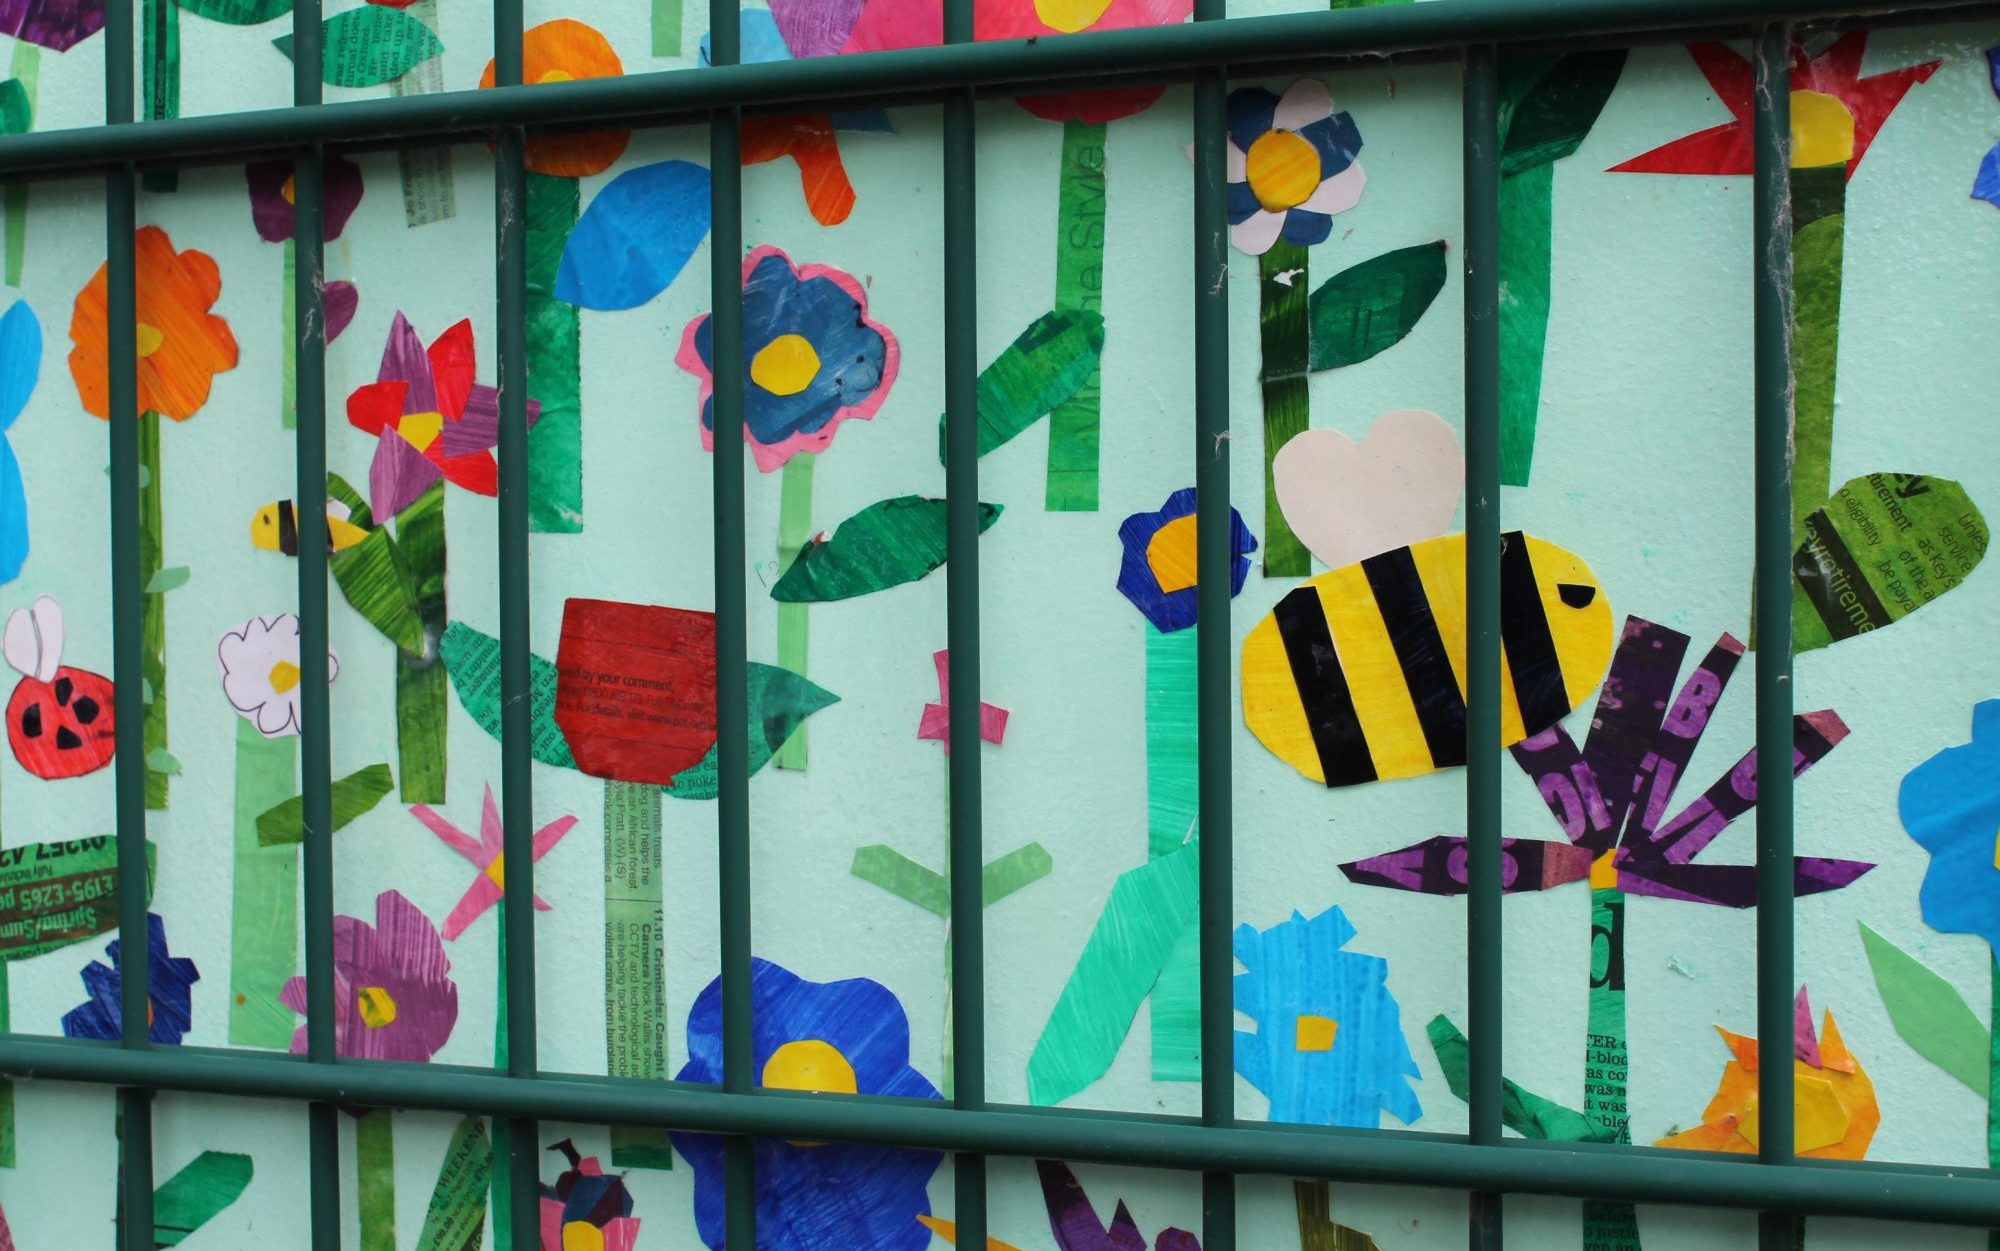 Collage artwork on a school fence, featuring flowers and bees